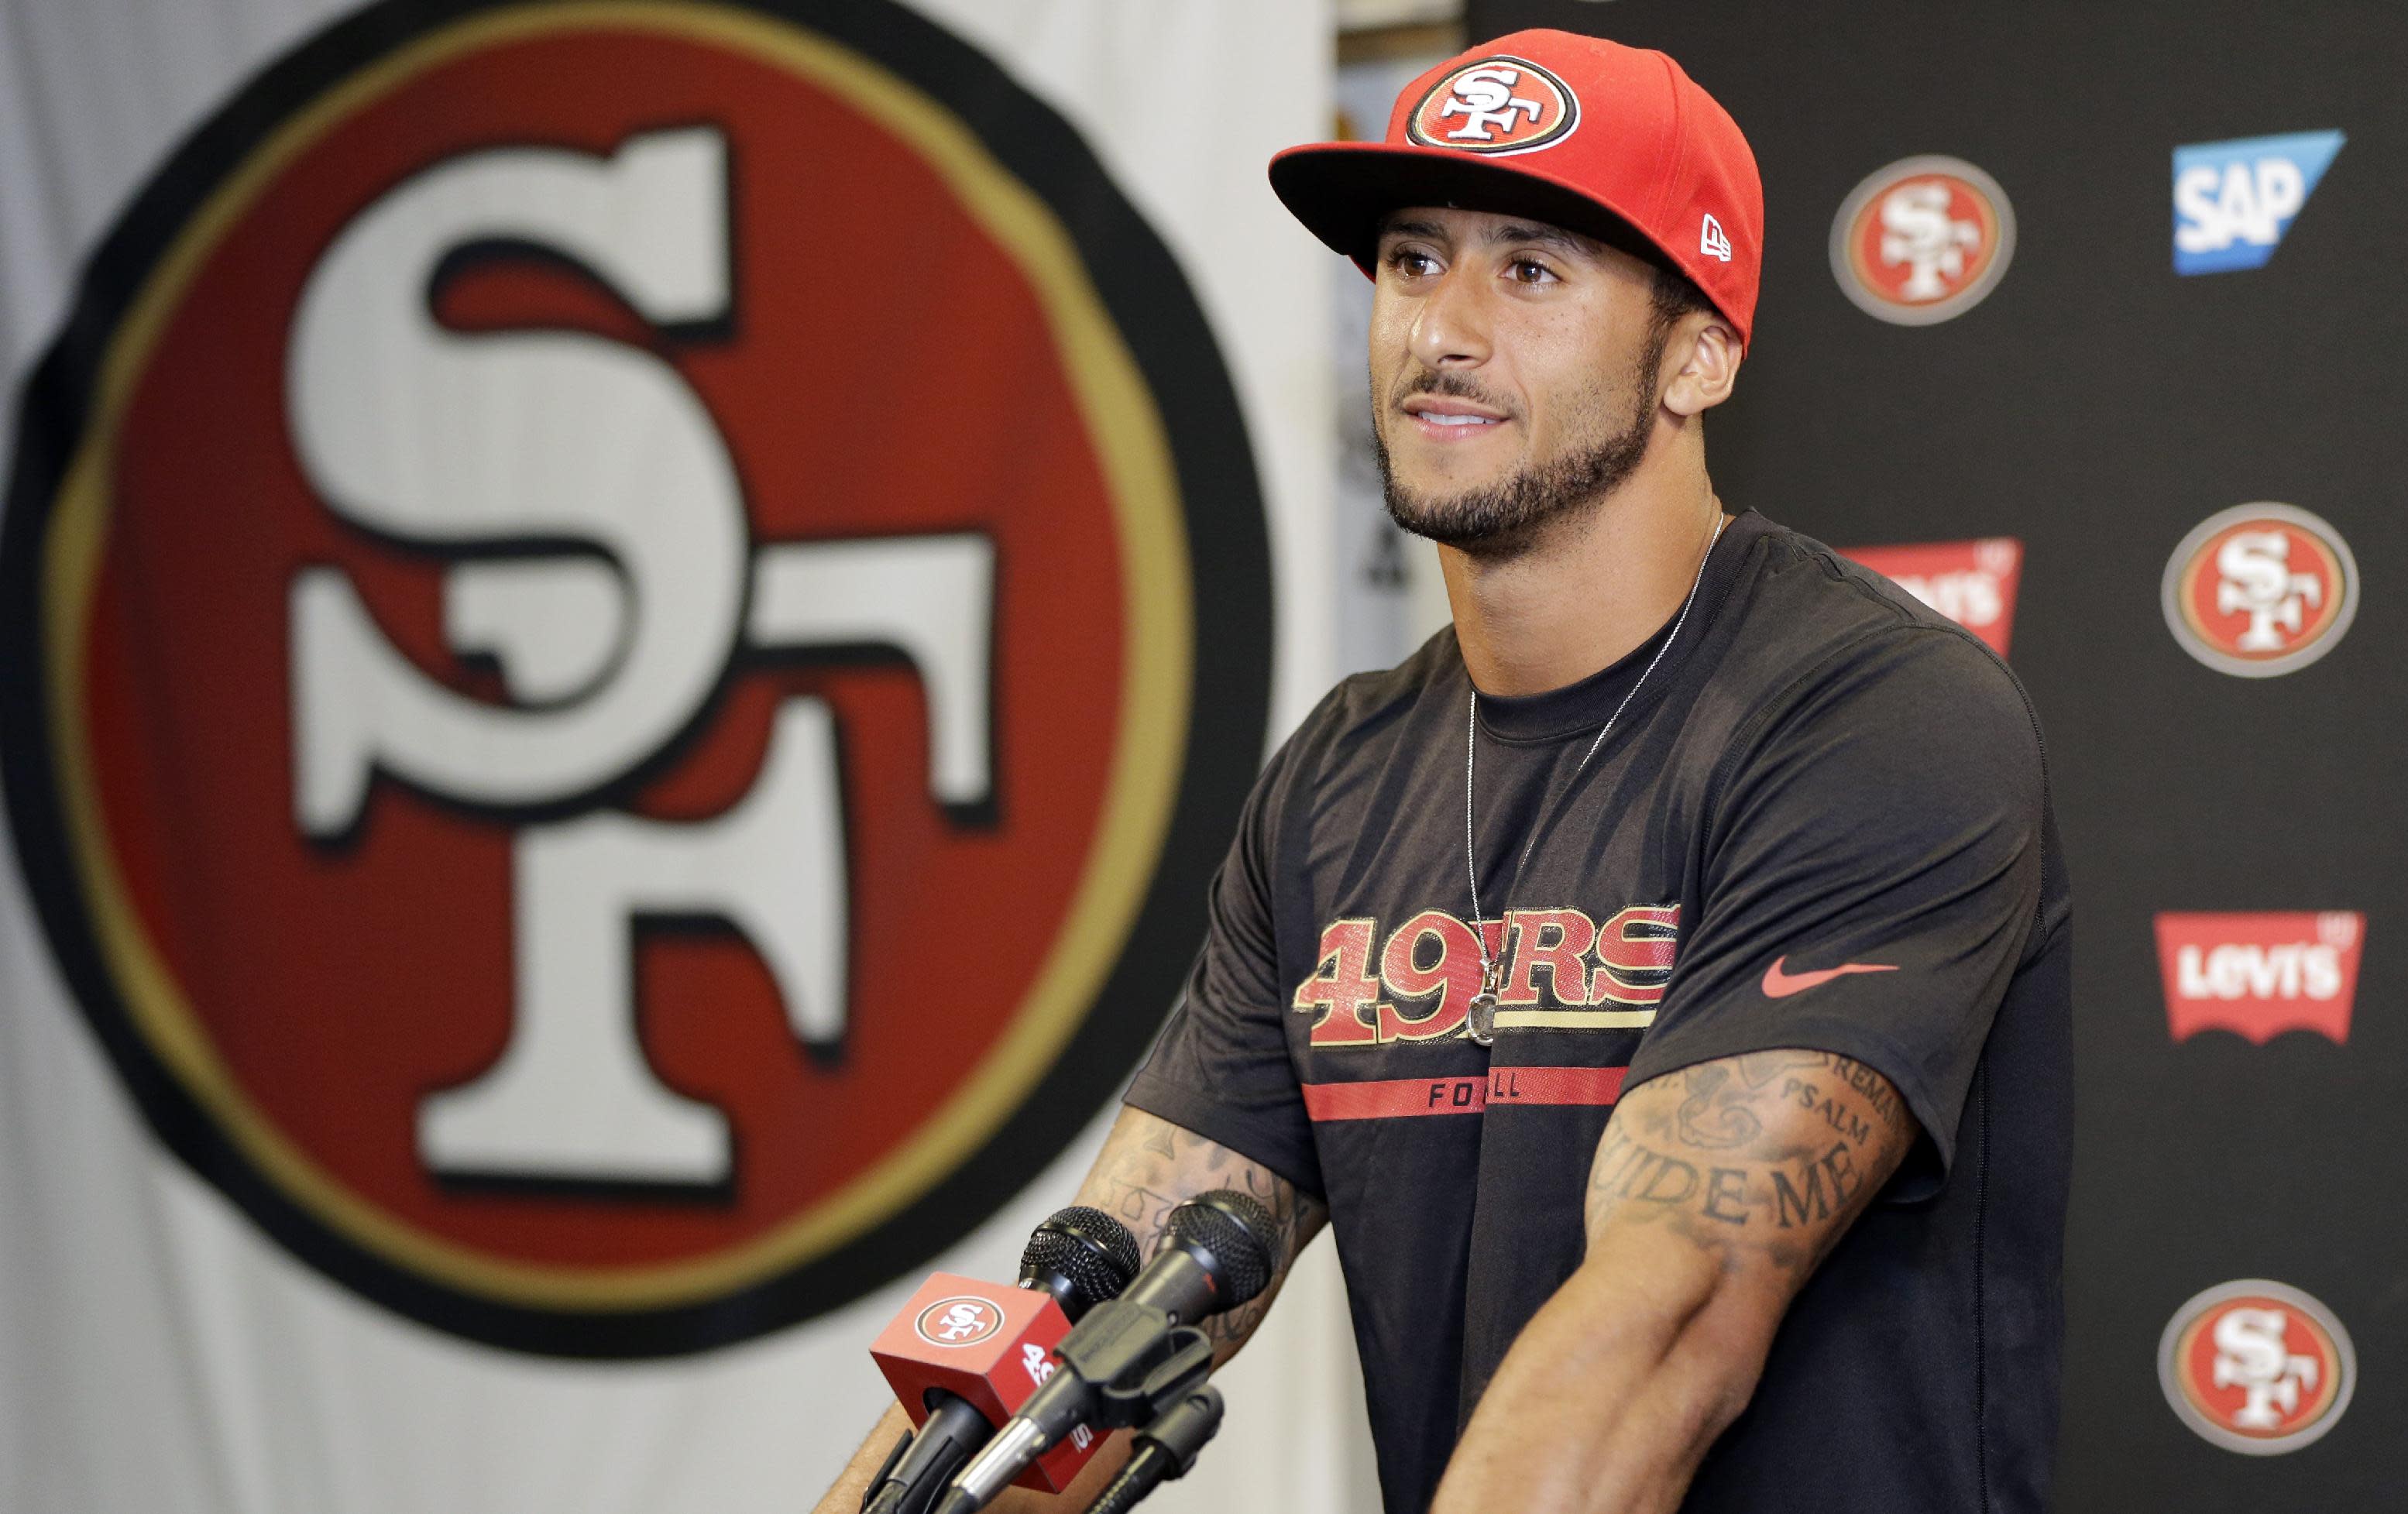 No charges in Fla. for Kaepernick, 2 other players3109 x 1955